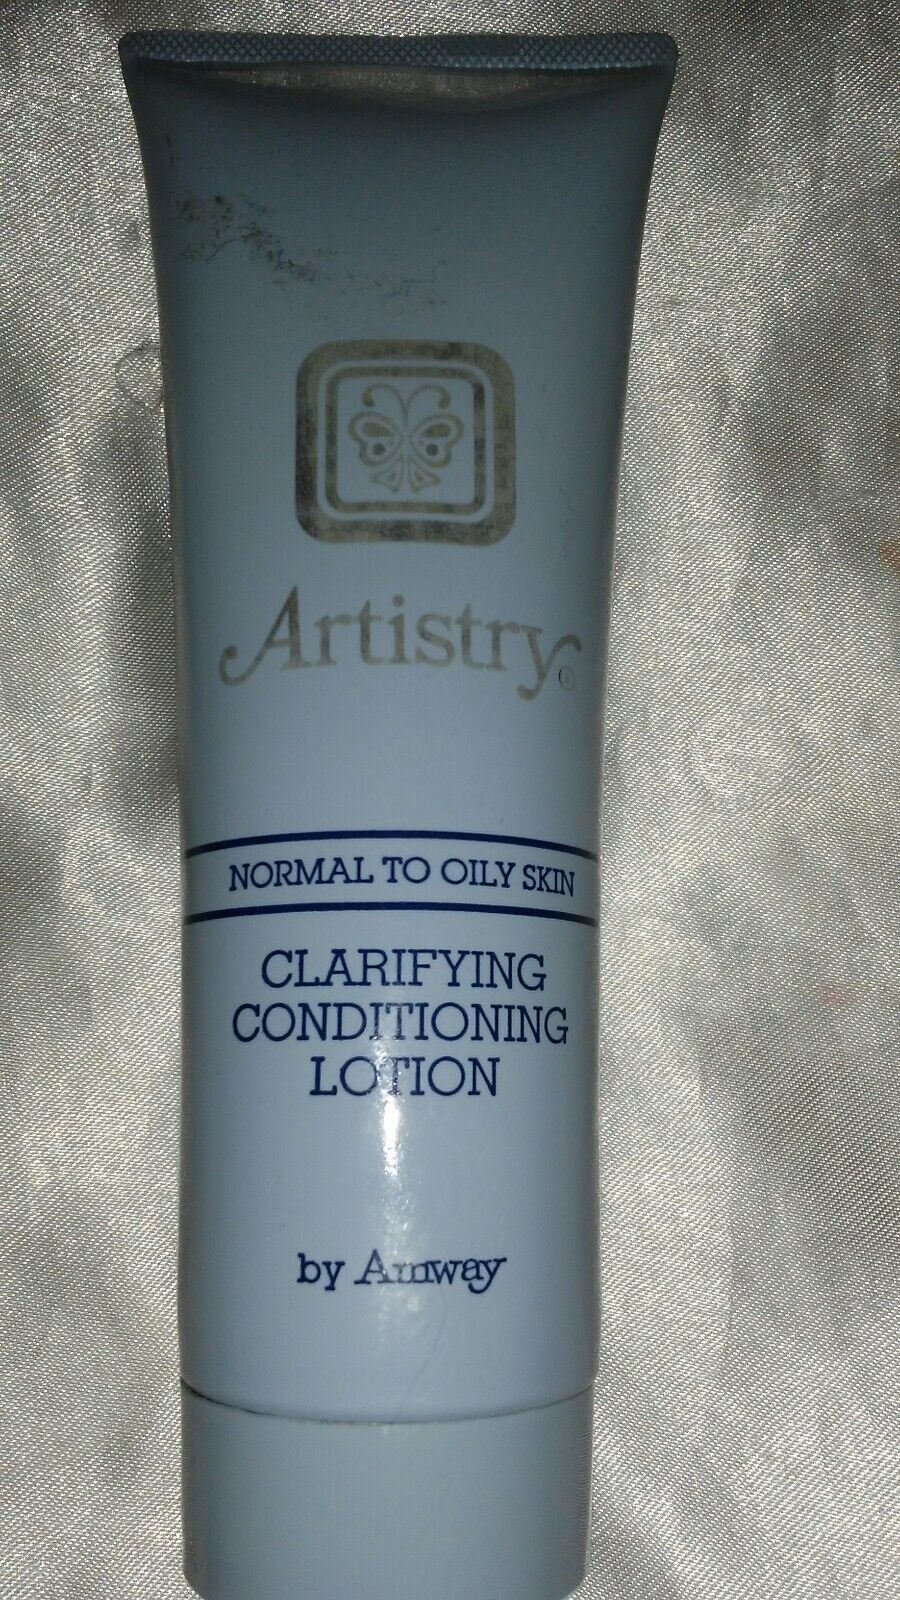 AMWAY ARTISTRY CLARIFYING CONDITIONING LOTION NORMAL TO OILY SKIN 4.0 OZ